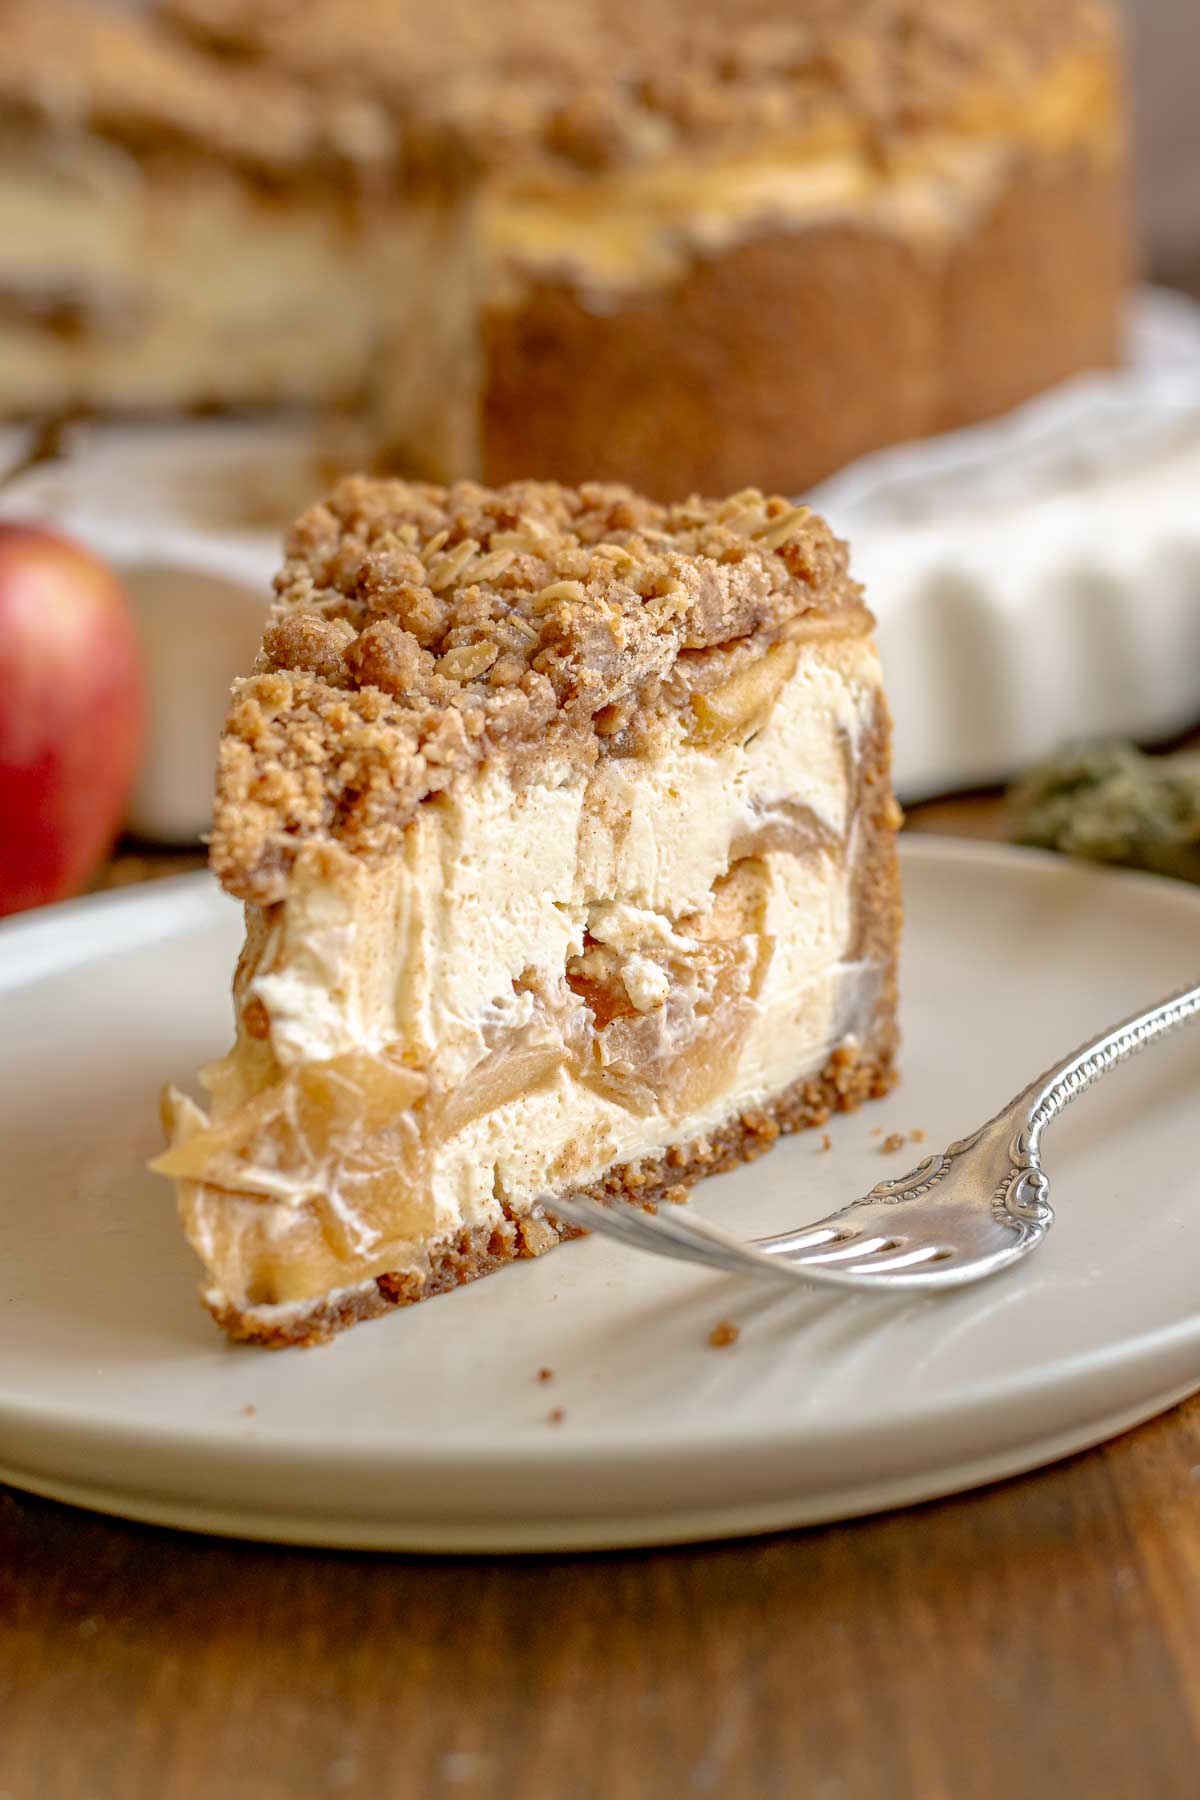 A slice of apple crisp cheesecake on a plate with a fork next to it.